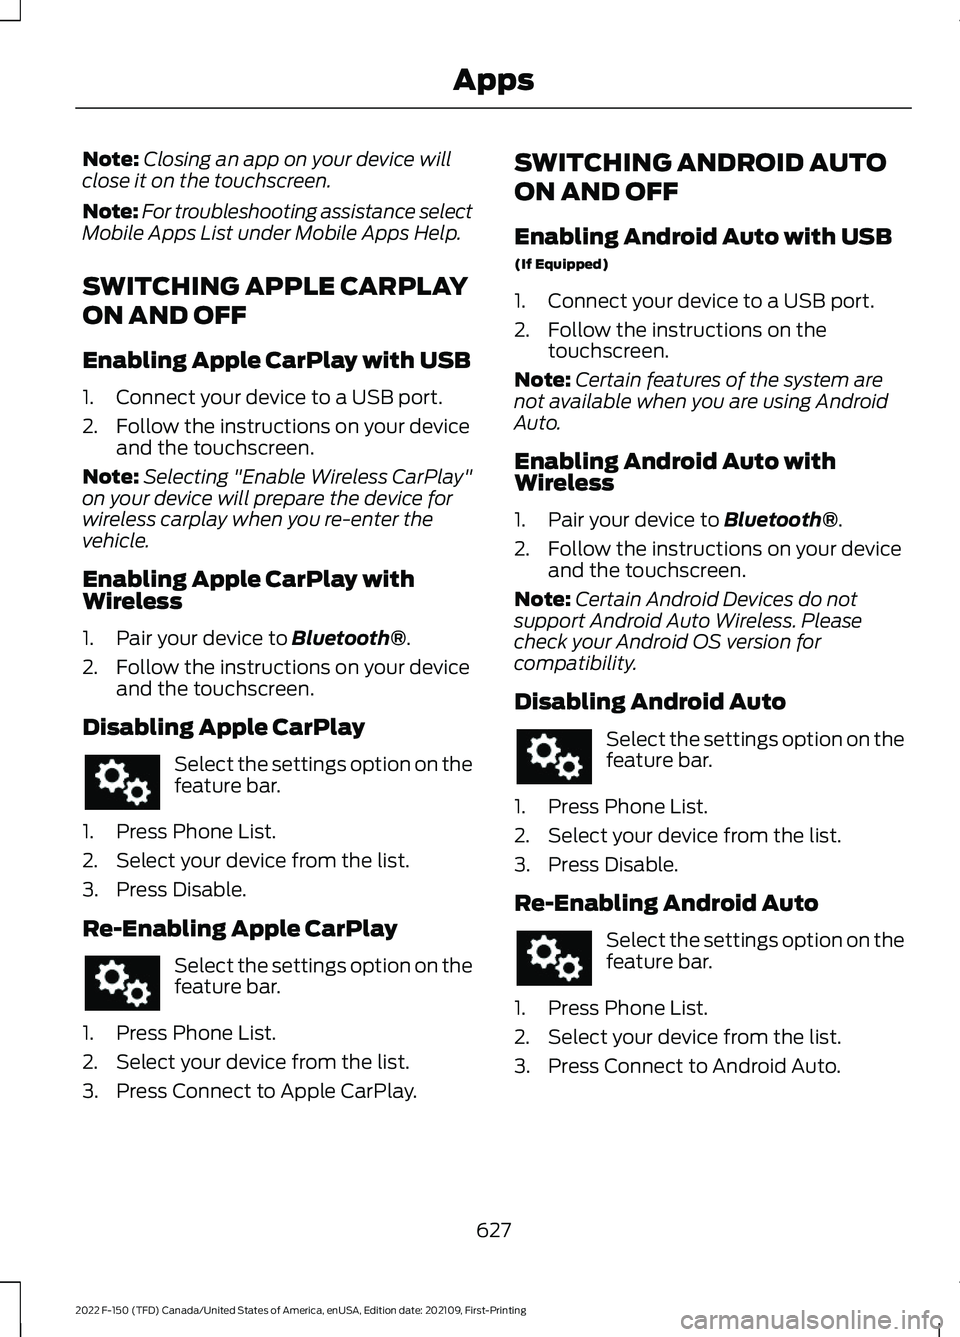 FORD F-150 2022 User Guide Note:
Closing an app on your device will
close it on the touchscreen.
Note: For troubleshooting assistance select
Mobile Apps List under Mobile Apps Help.
SWITCHING APPLE CARPLAY
ON AND OFF
Enabling A